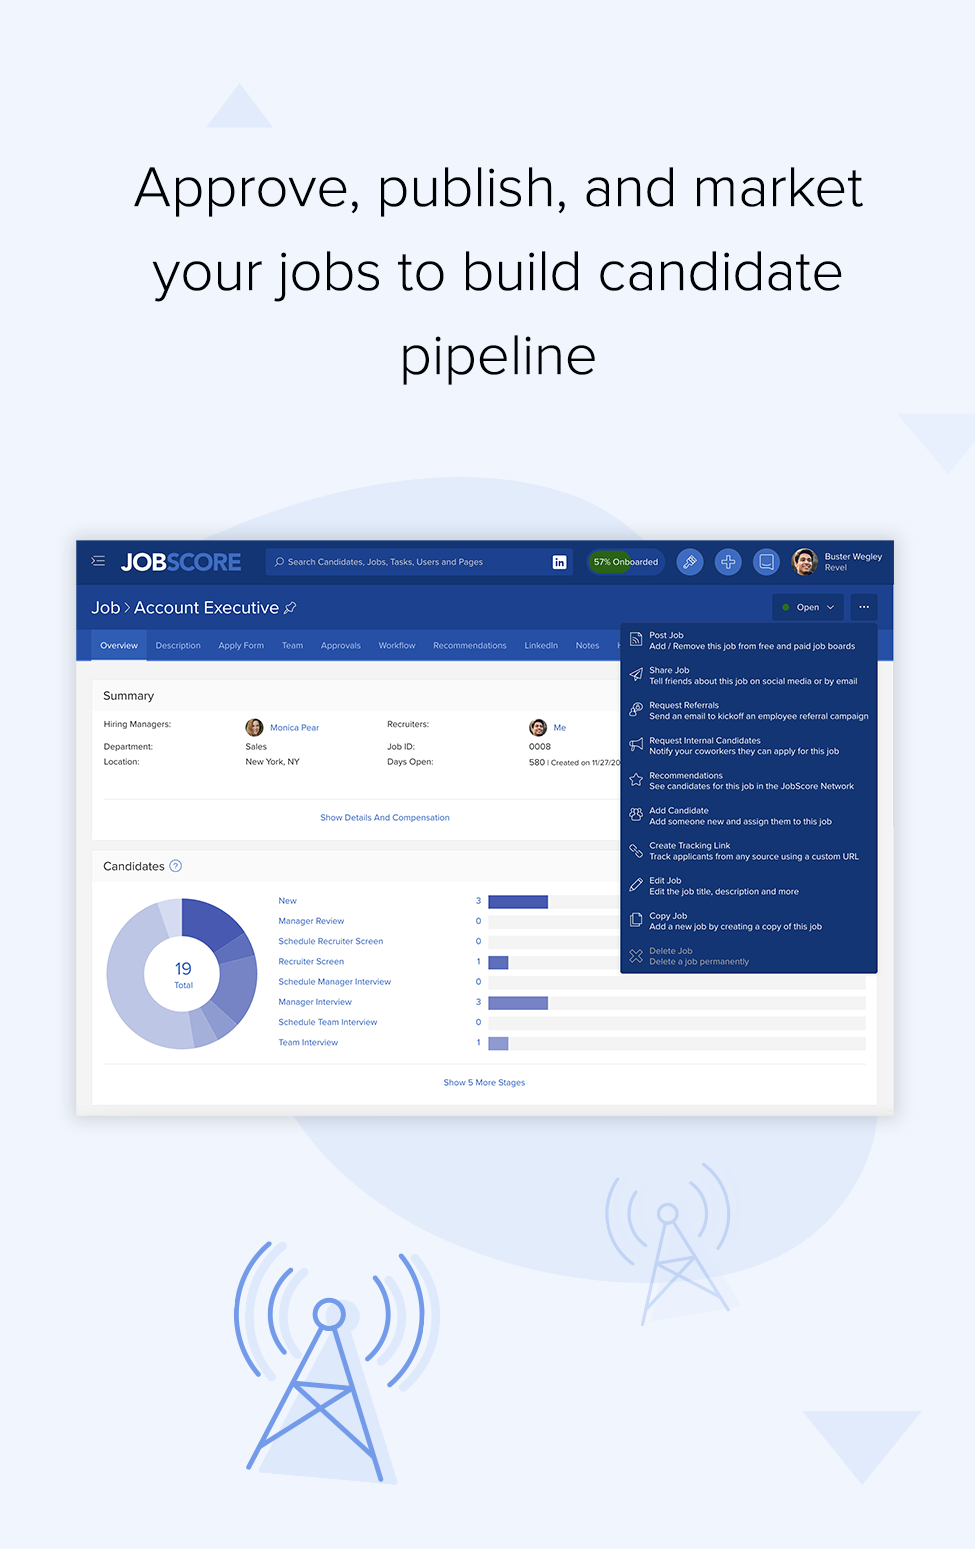 Approve, publish, and market your jobs to build candidate pipeline | mobile recruiting software jobs